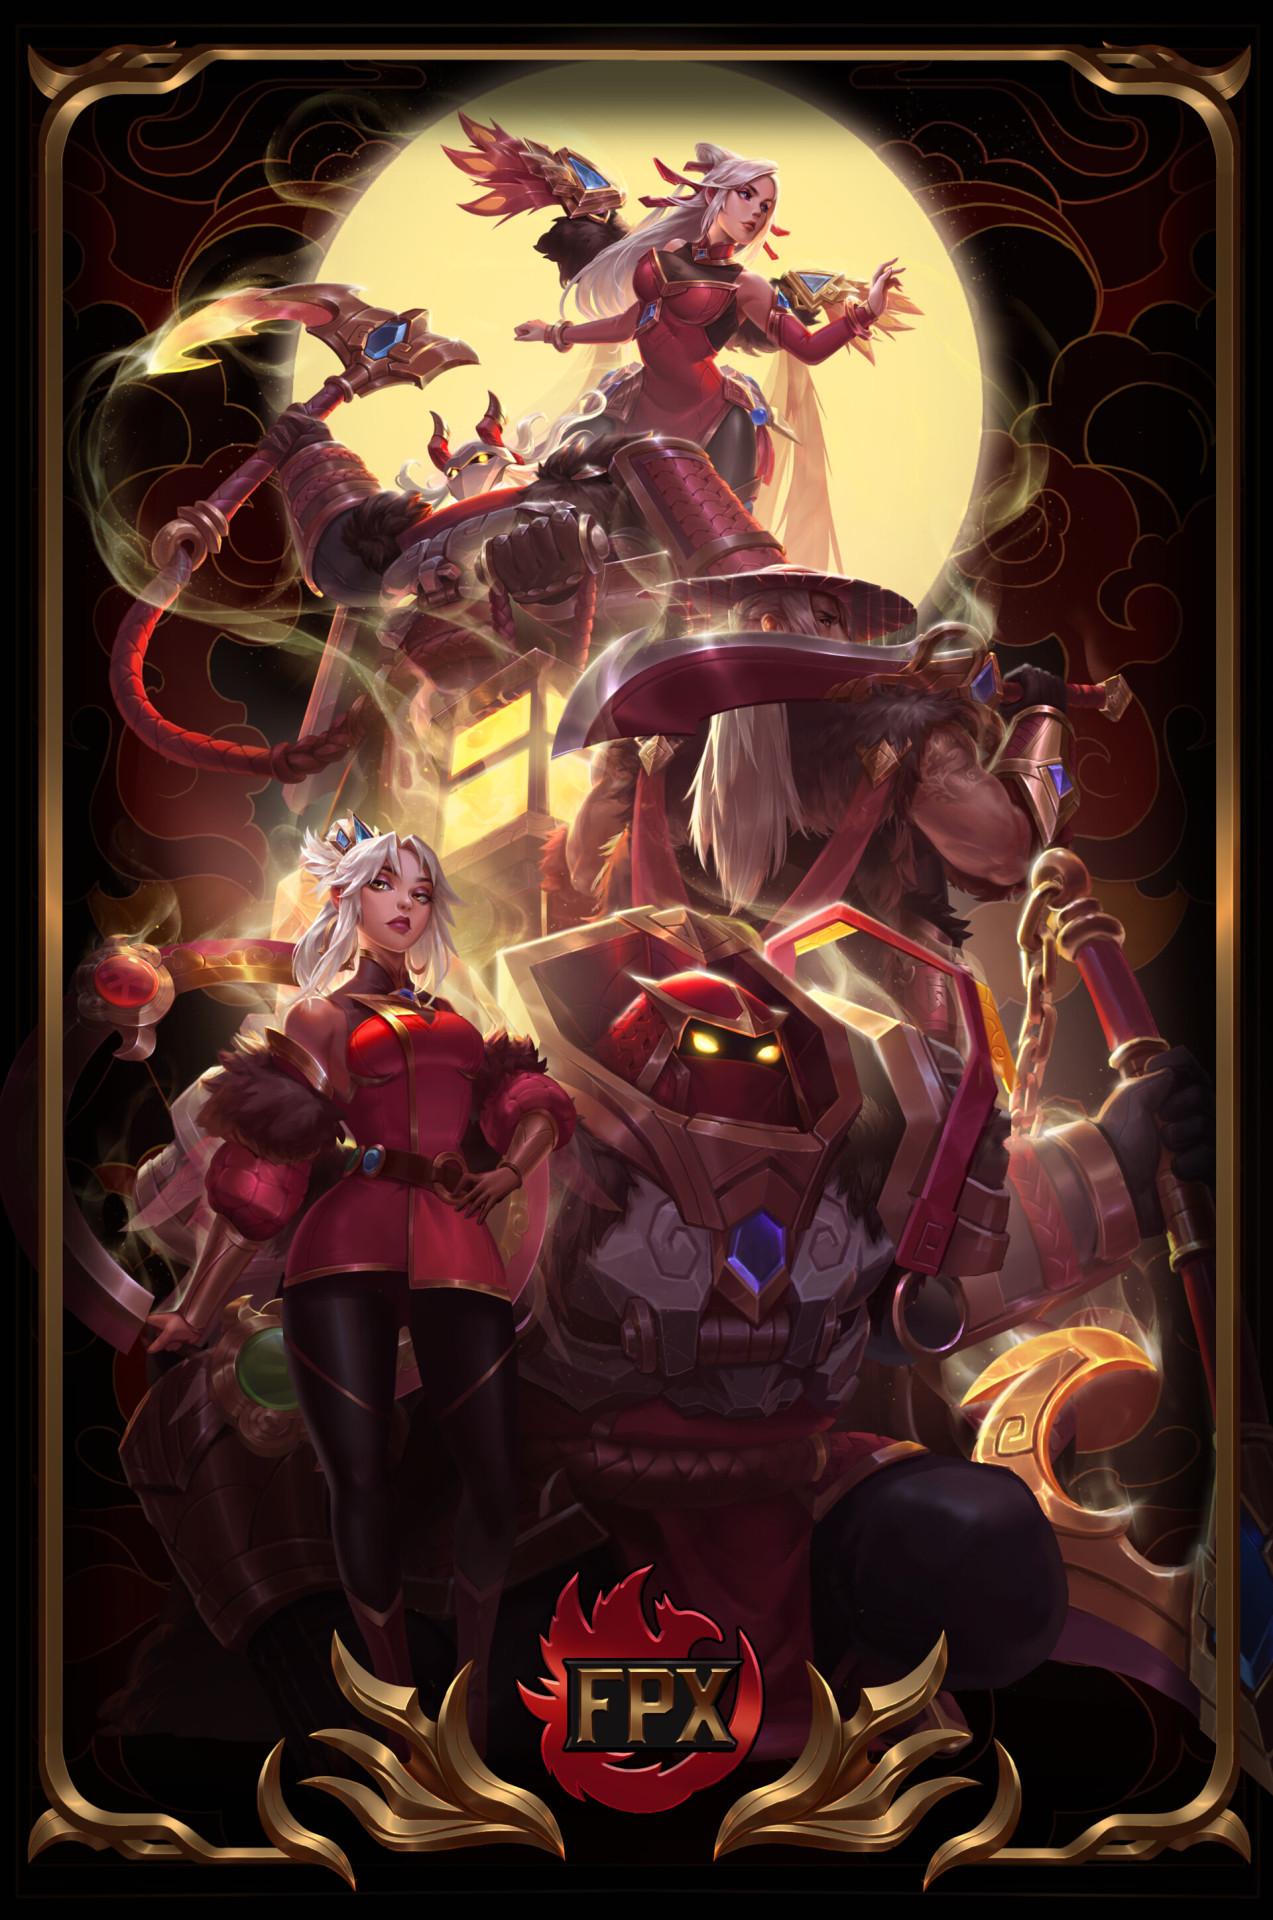 ♥『League of Legends』♥ — FPX World Skins Concept Art by luoyu liu